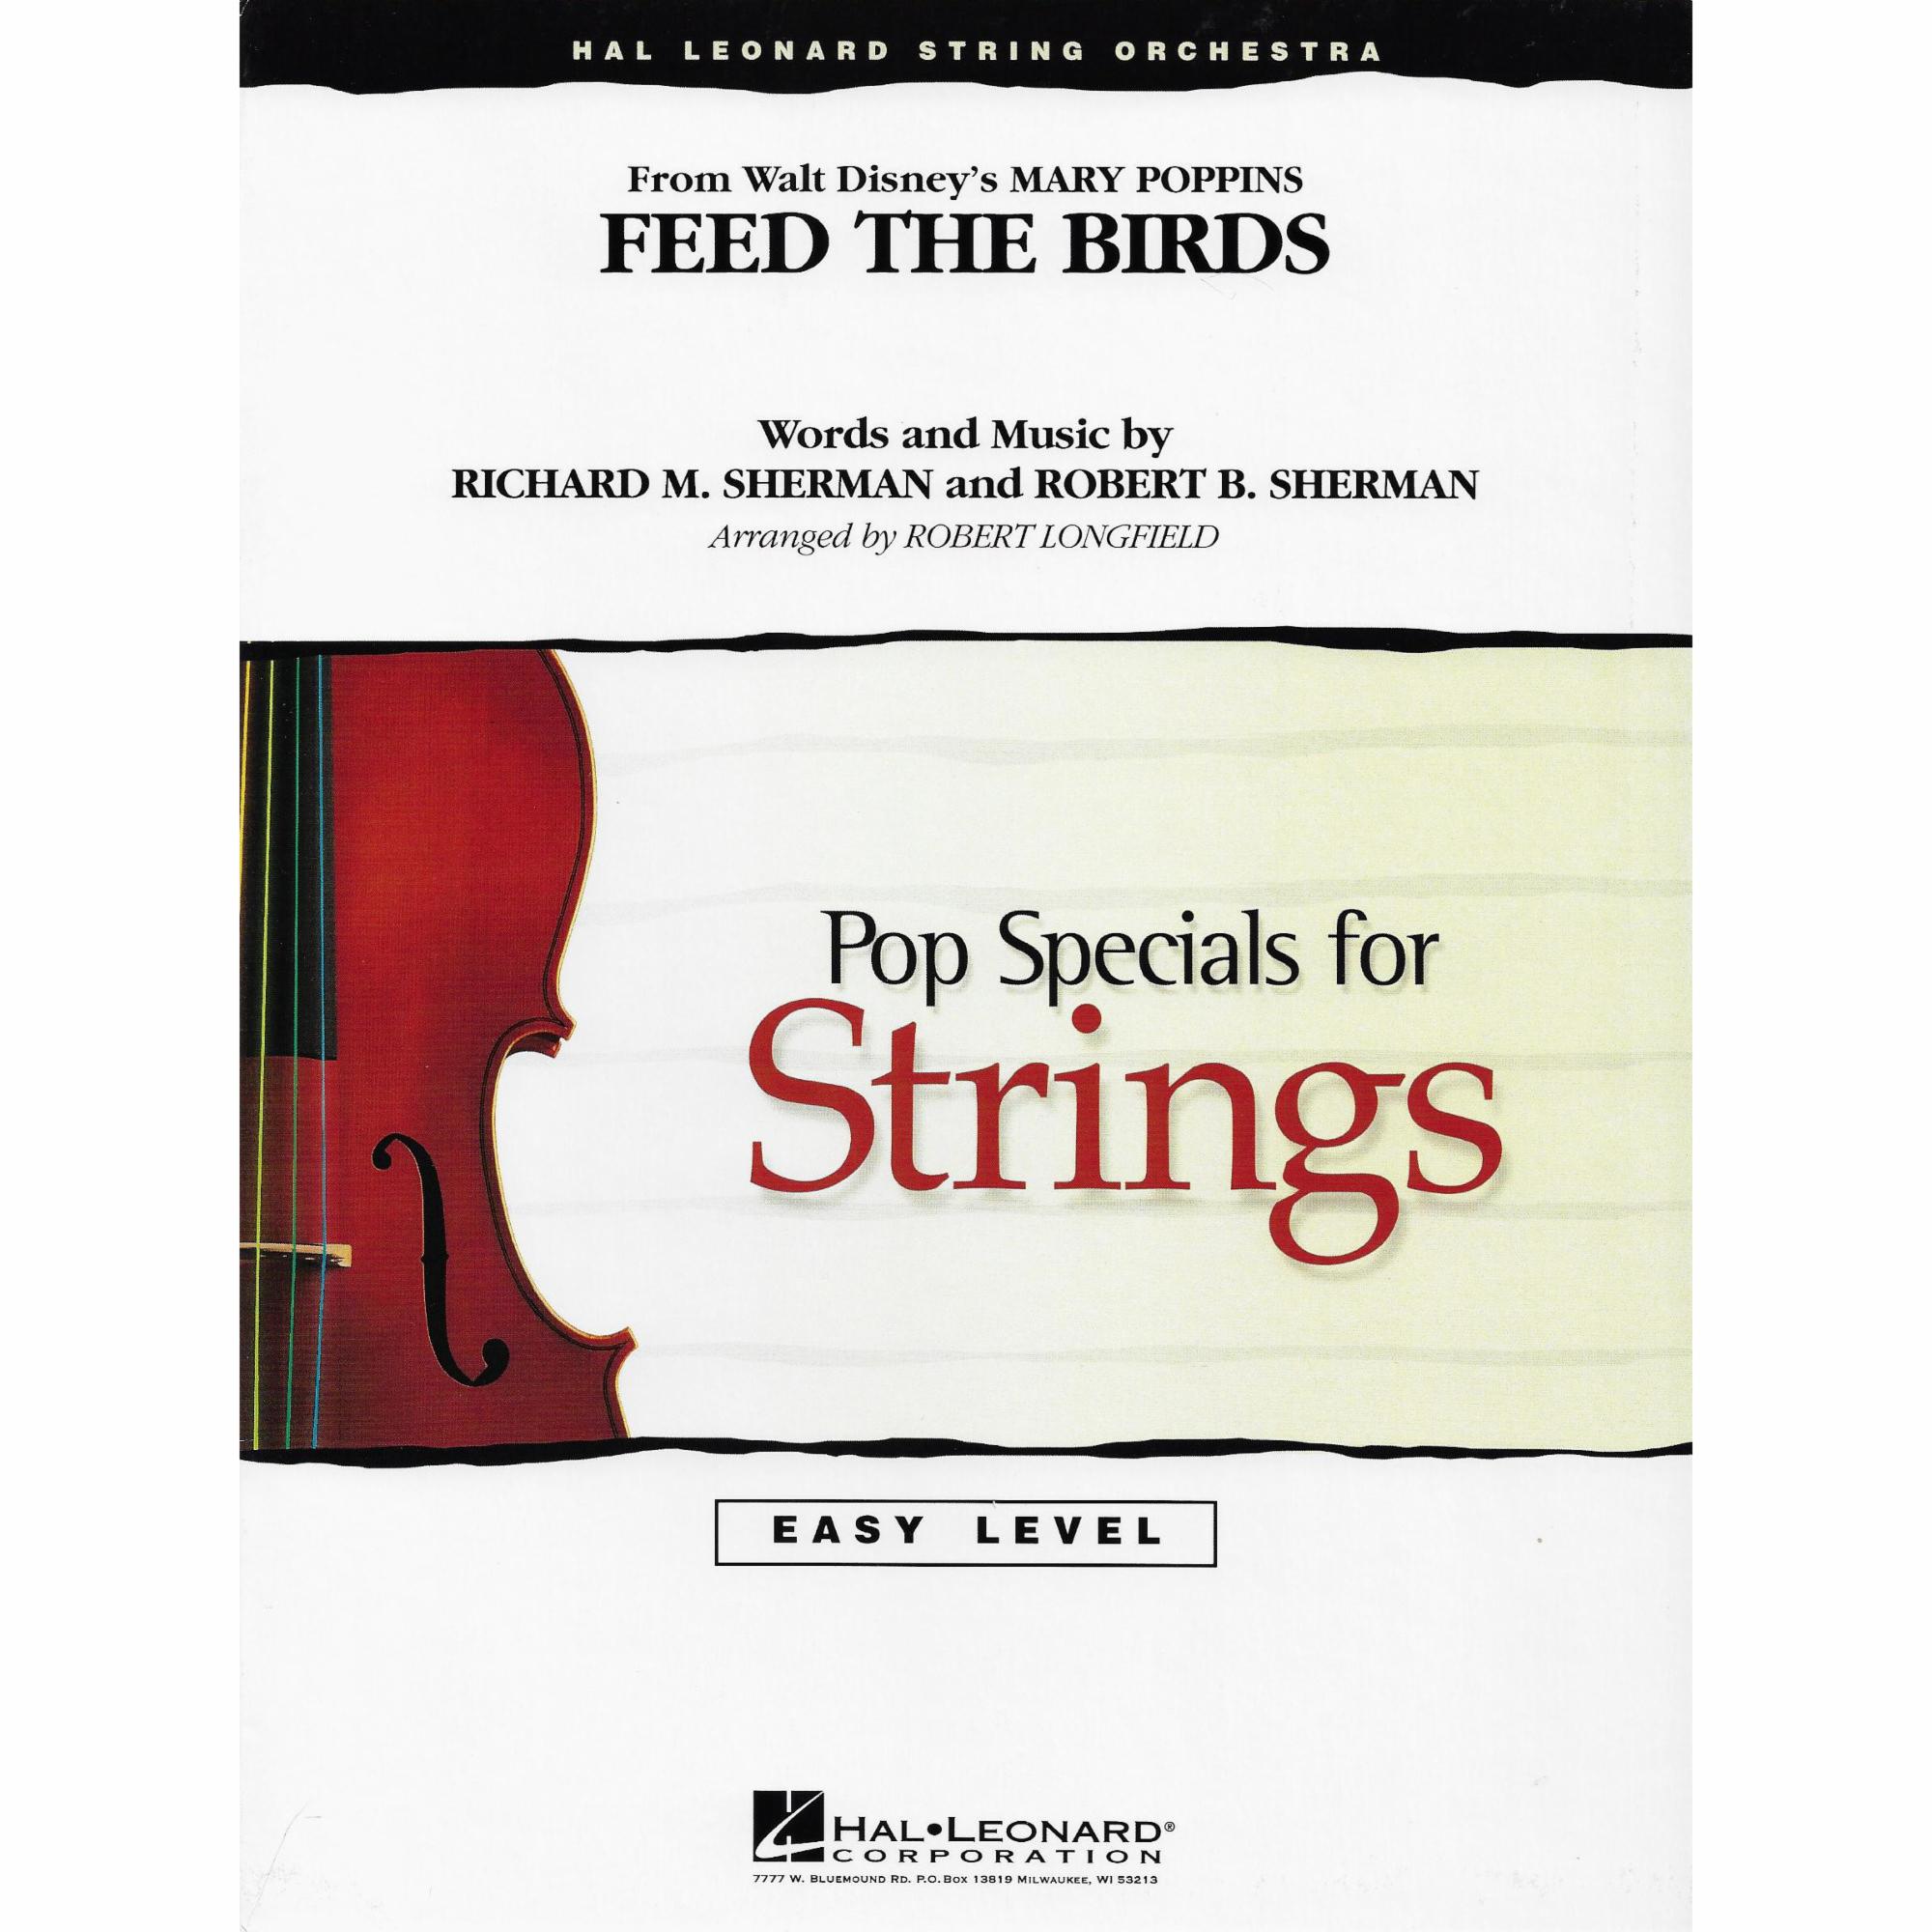 Feed the Birds from Mary Poppins for String Orchestra